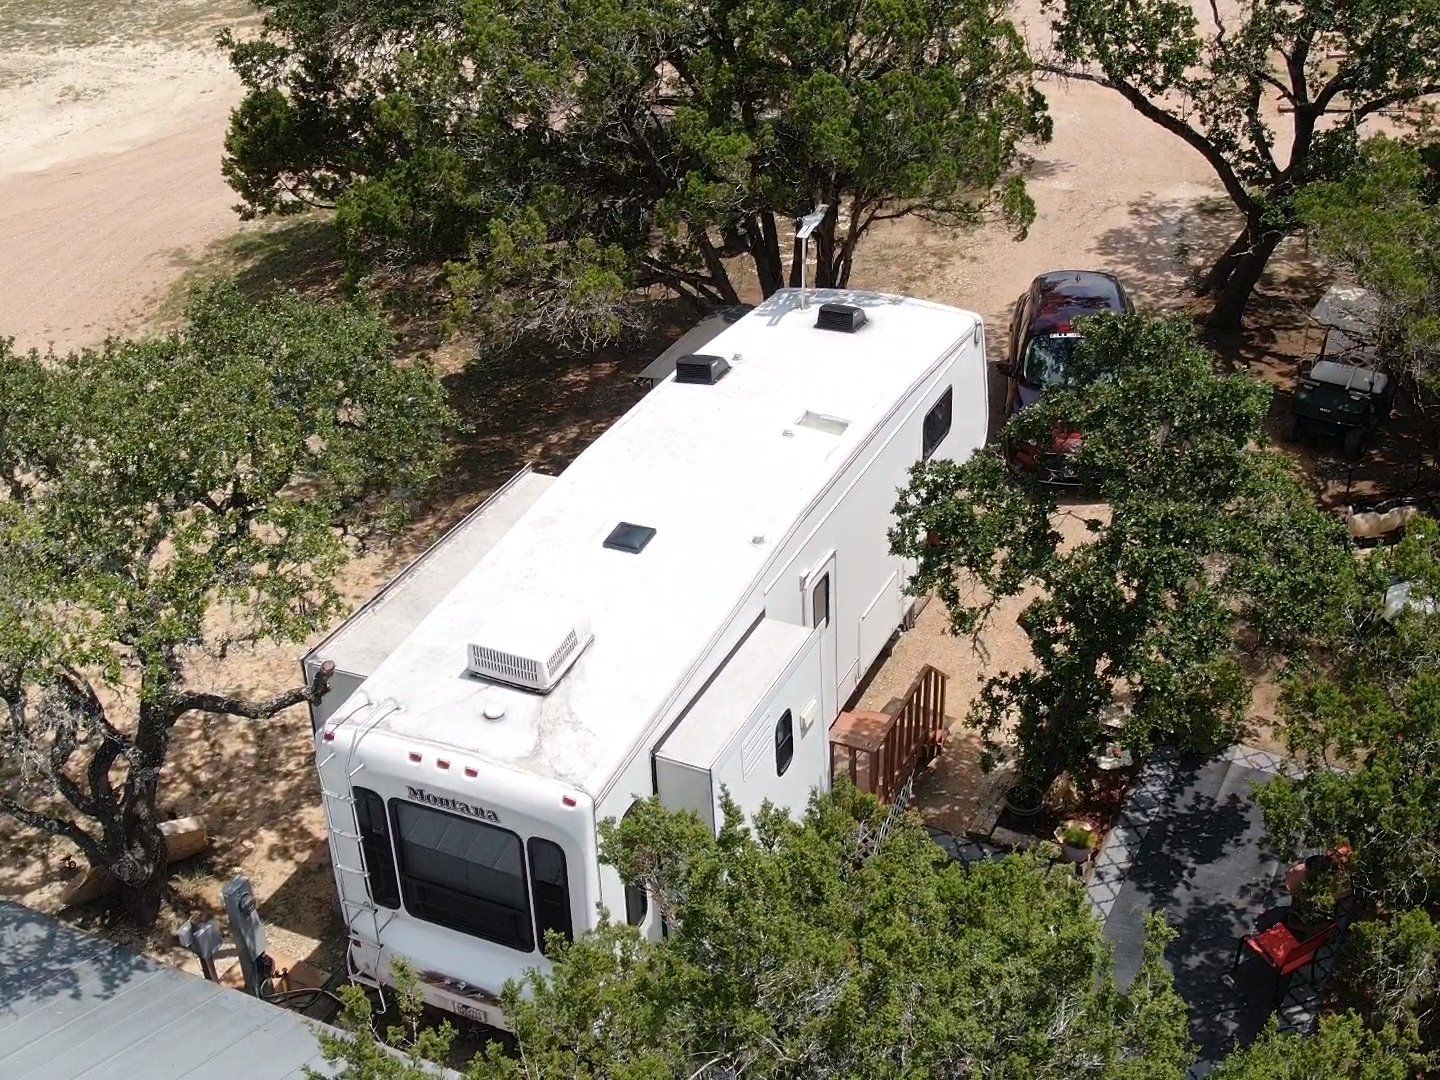 Full-time living in your motorhome, travel trailer, or your fifth-wheel camper near New Braunfels, TX. at Oak Meadows RV Park in Canyon Lake, Texas!